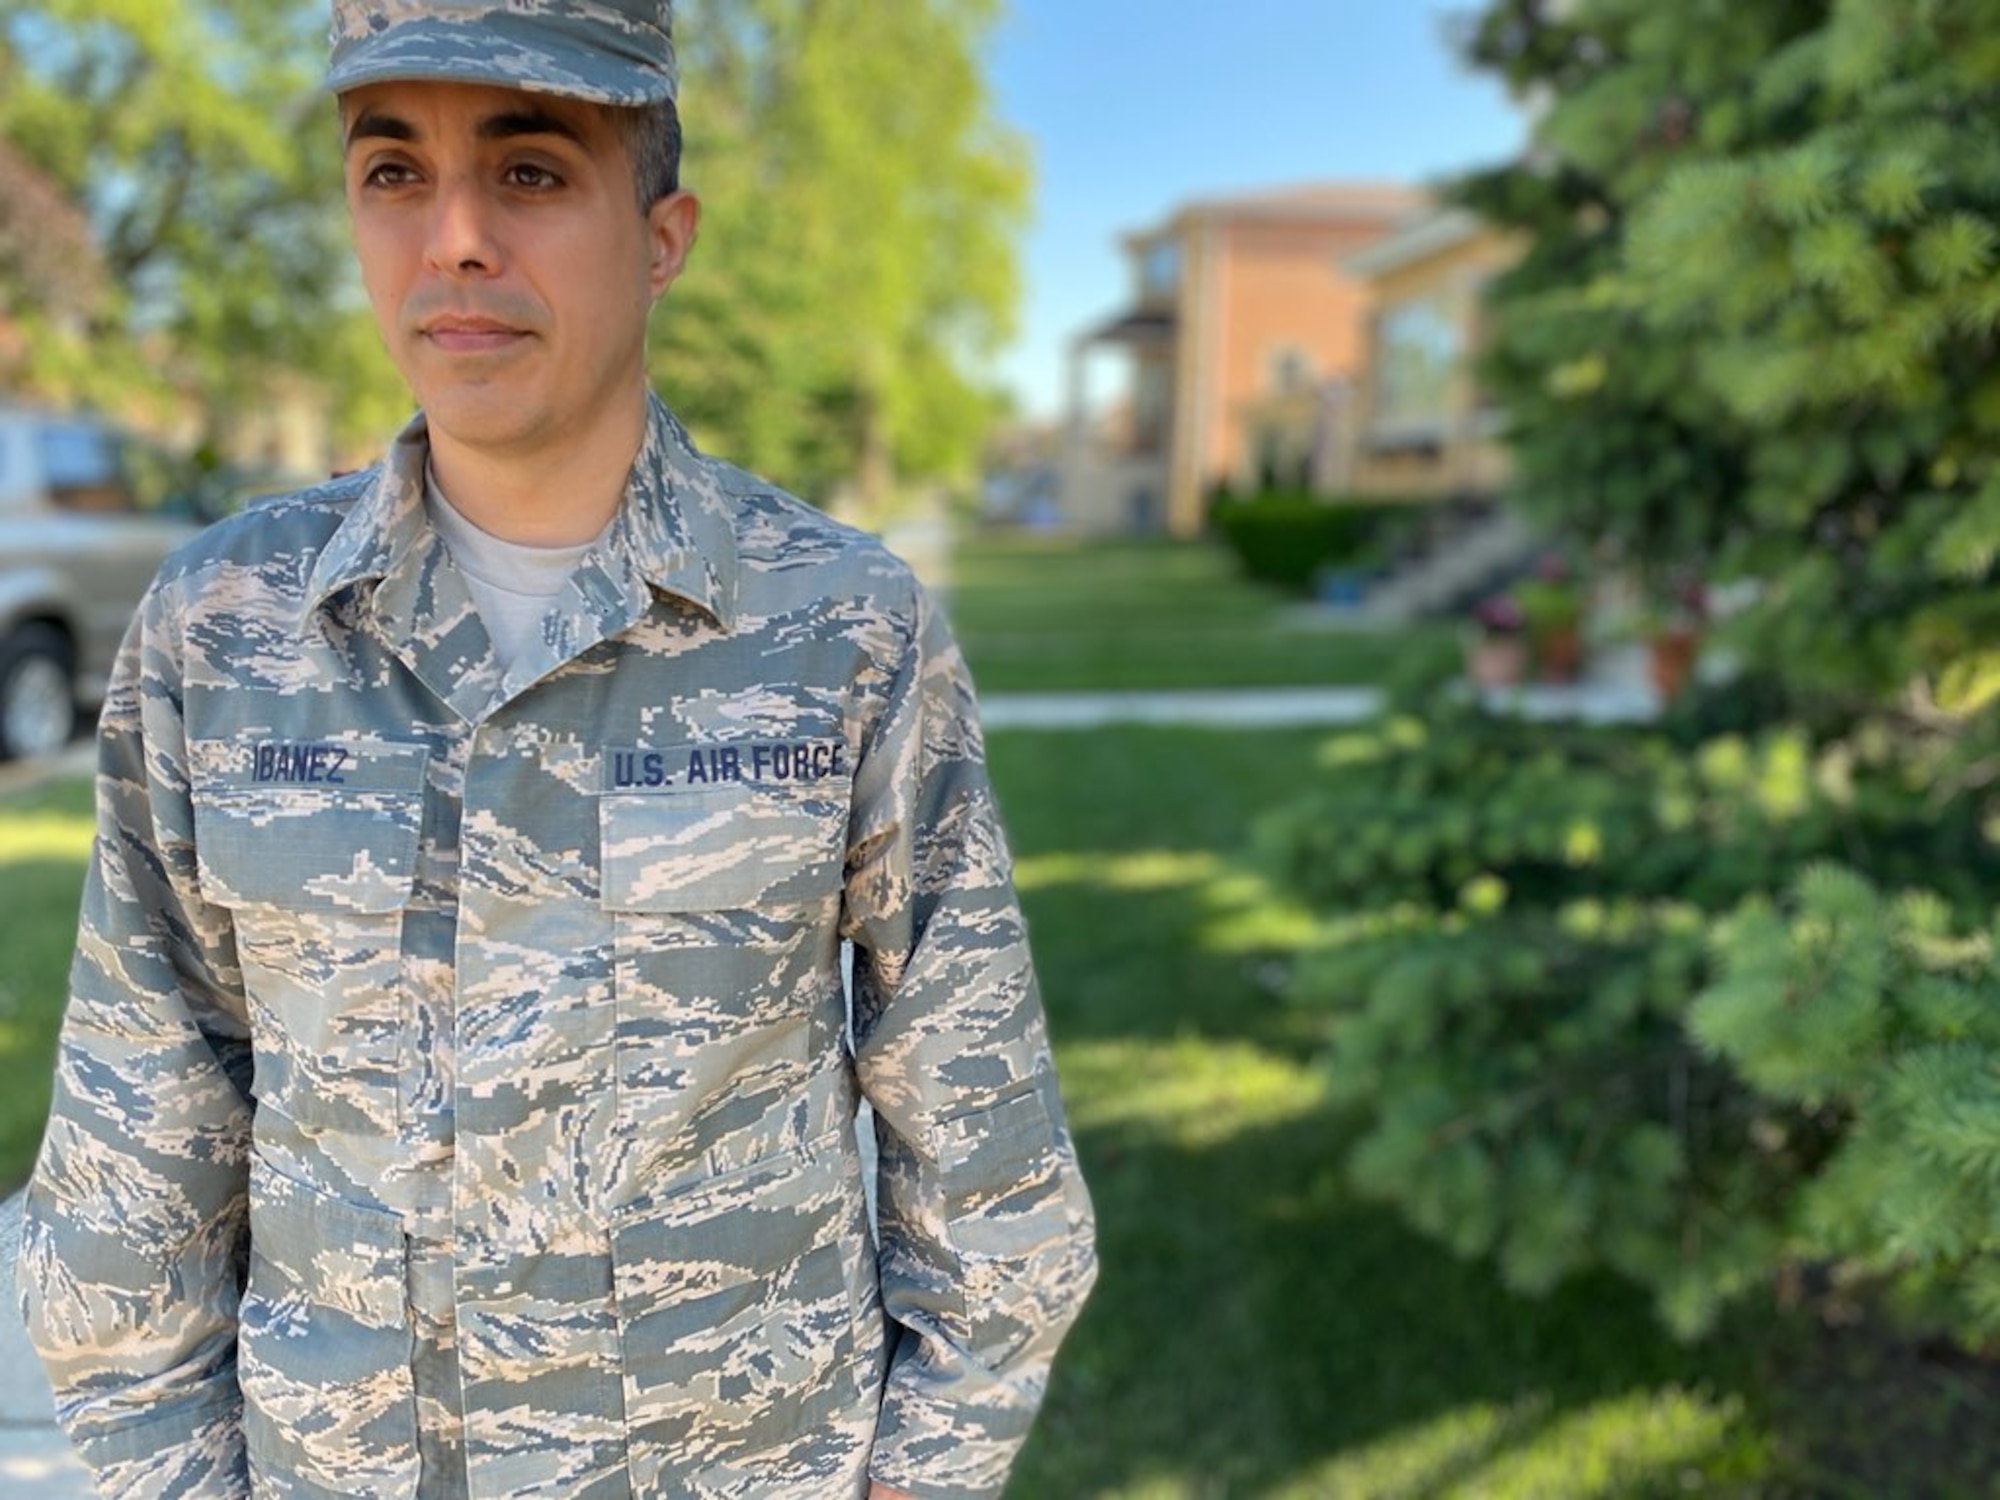 Tech. Sgt. Brandon Ibanez, a cyber intelligence analyst with the 854th Combat Operations Squadron, stands in uniform for a photo outside his home in Chicago, Illinois, June 15, 2020. As a Gladiator in the 960th Cyberspace Wing, it’s not a requirement to don the traditional uniform of ancient Roman fighters, and it would be impractical because the enemy in cyberspace doesn’t attack using guns or spears. (Courtesy photo by Anna Czekaj)